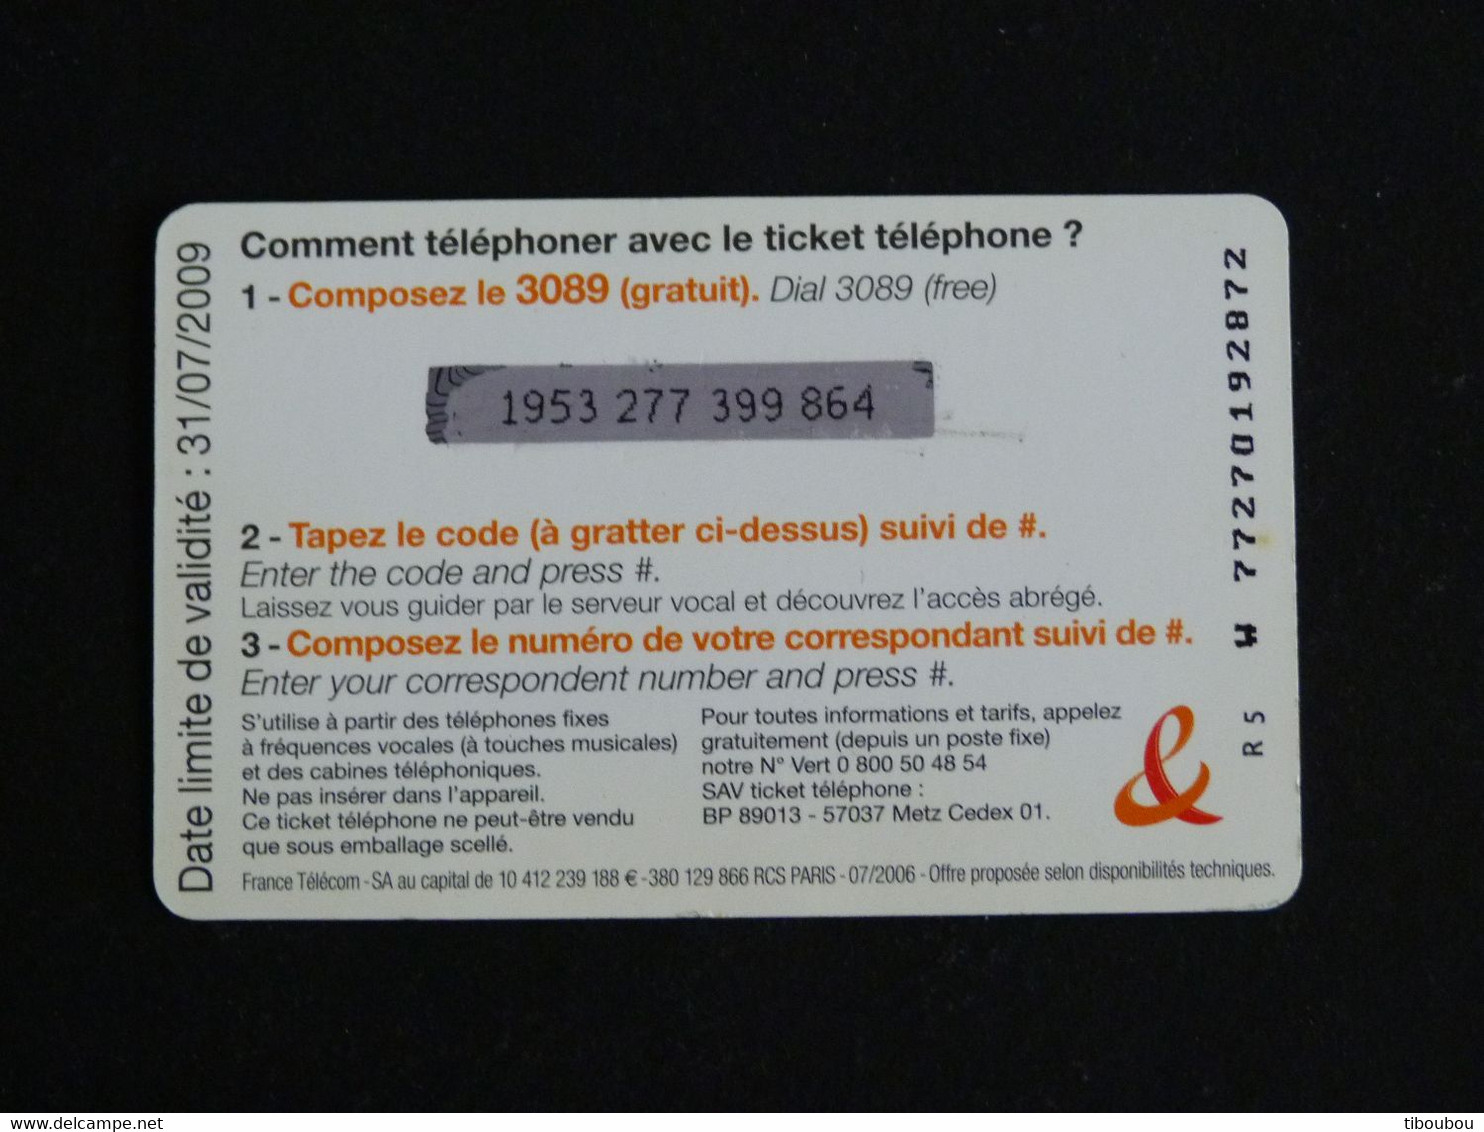 TELECARTE TICKET TELEPHONE FRANCE EUROPE 5 EUROS FRANCE TELECOM RUGBY - Tickets FT